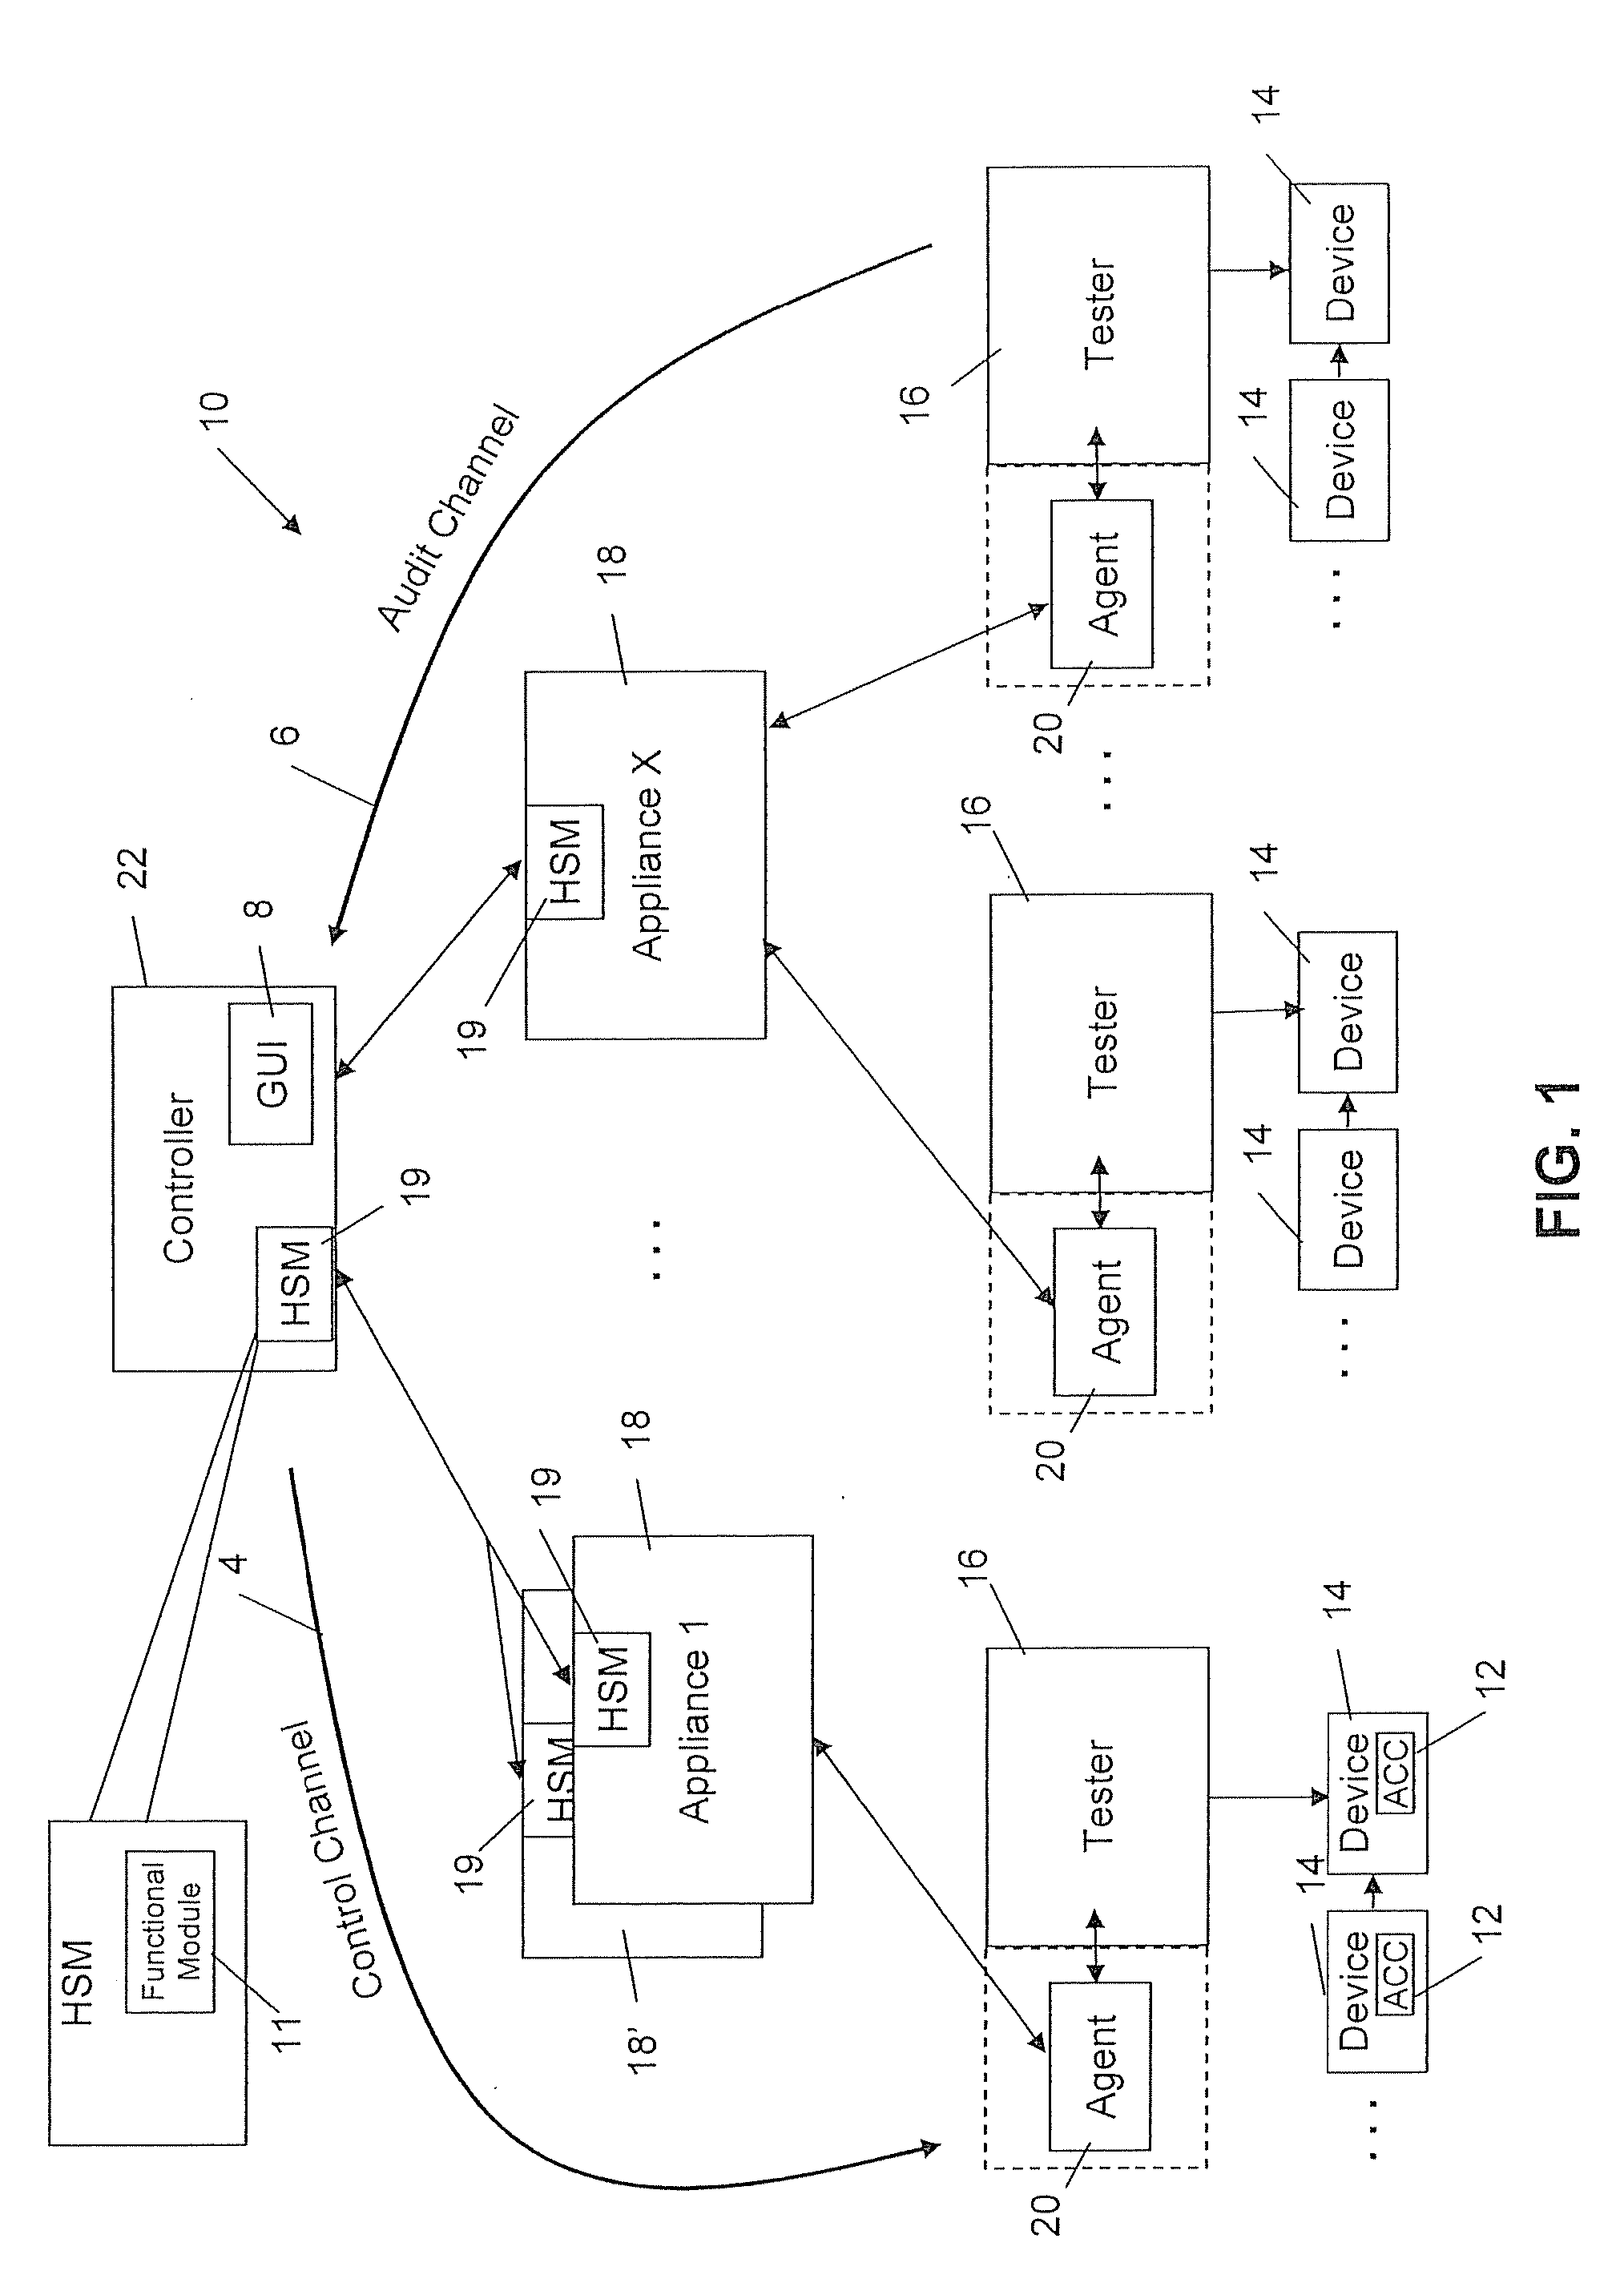 System and method for performing serialization of devices